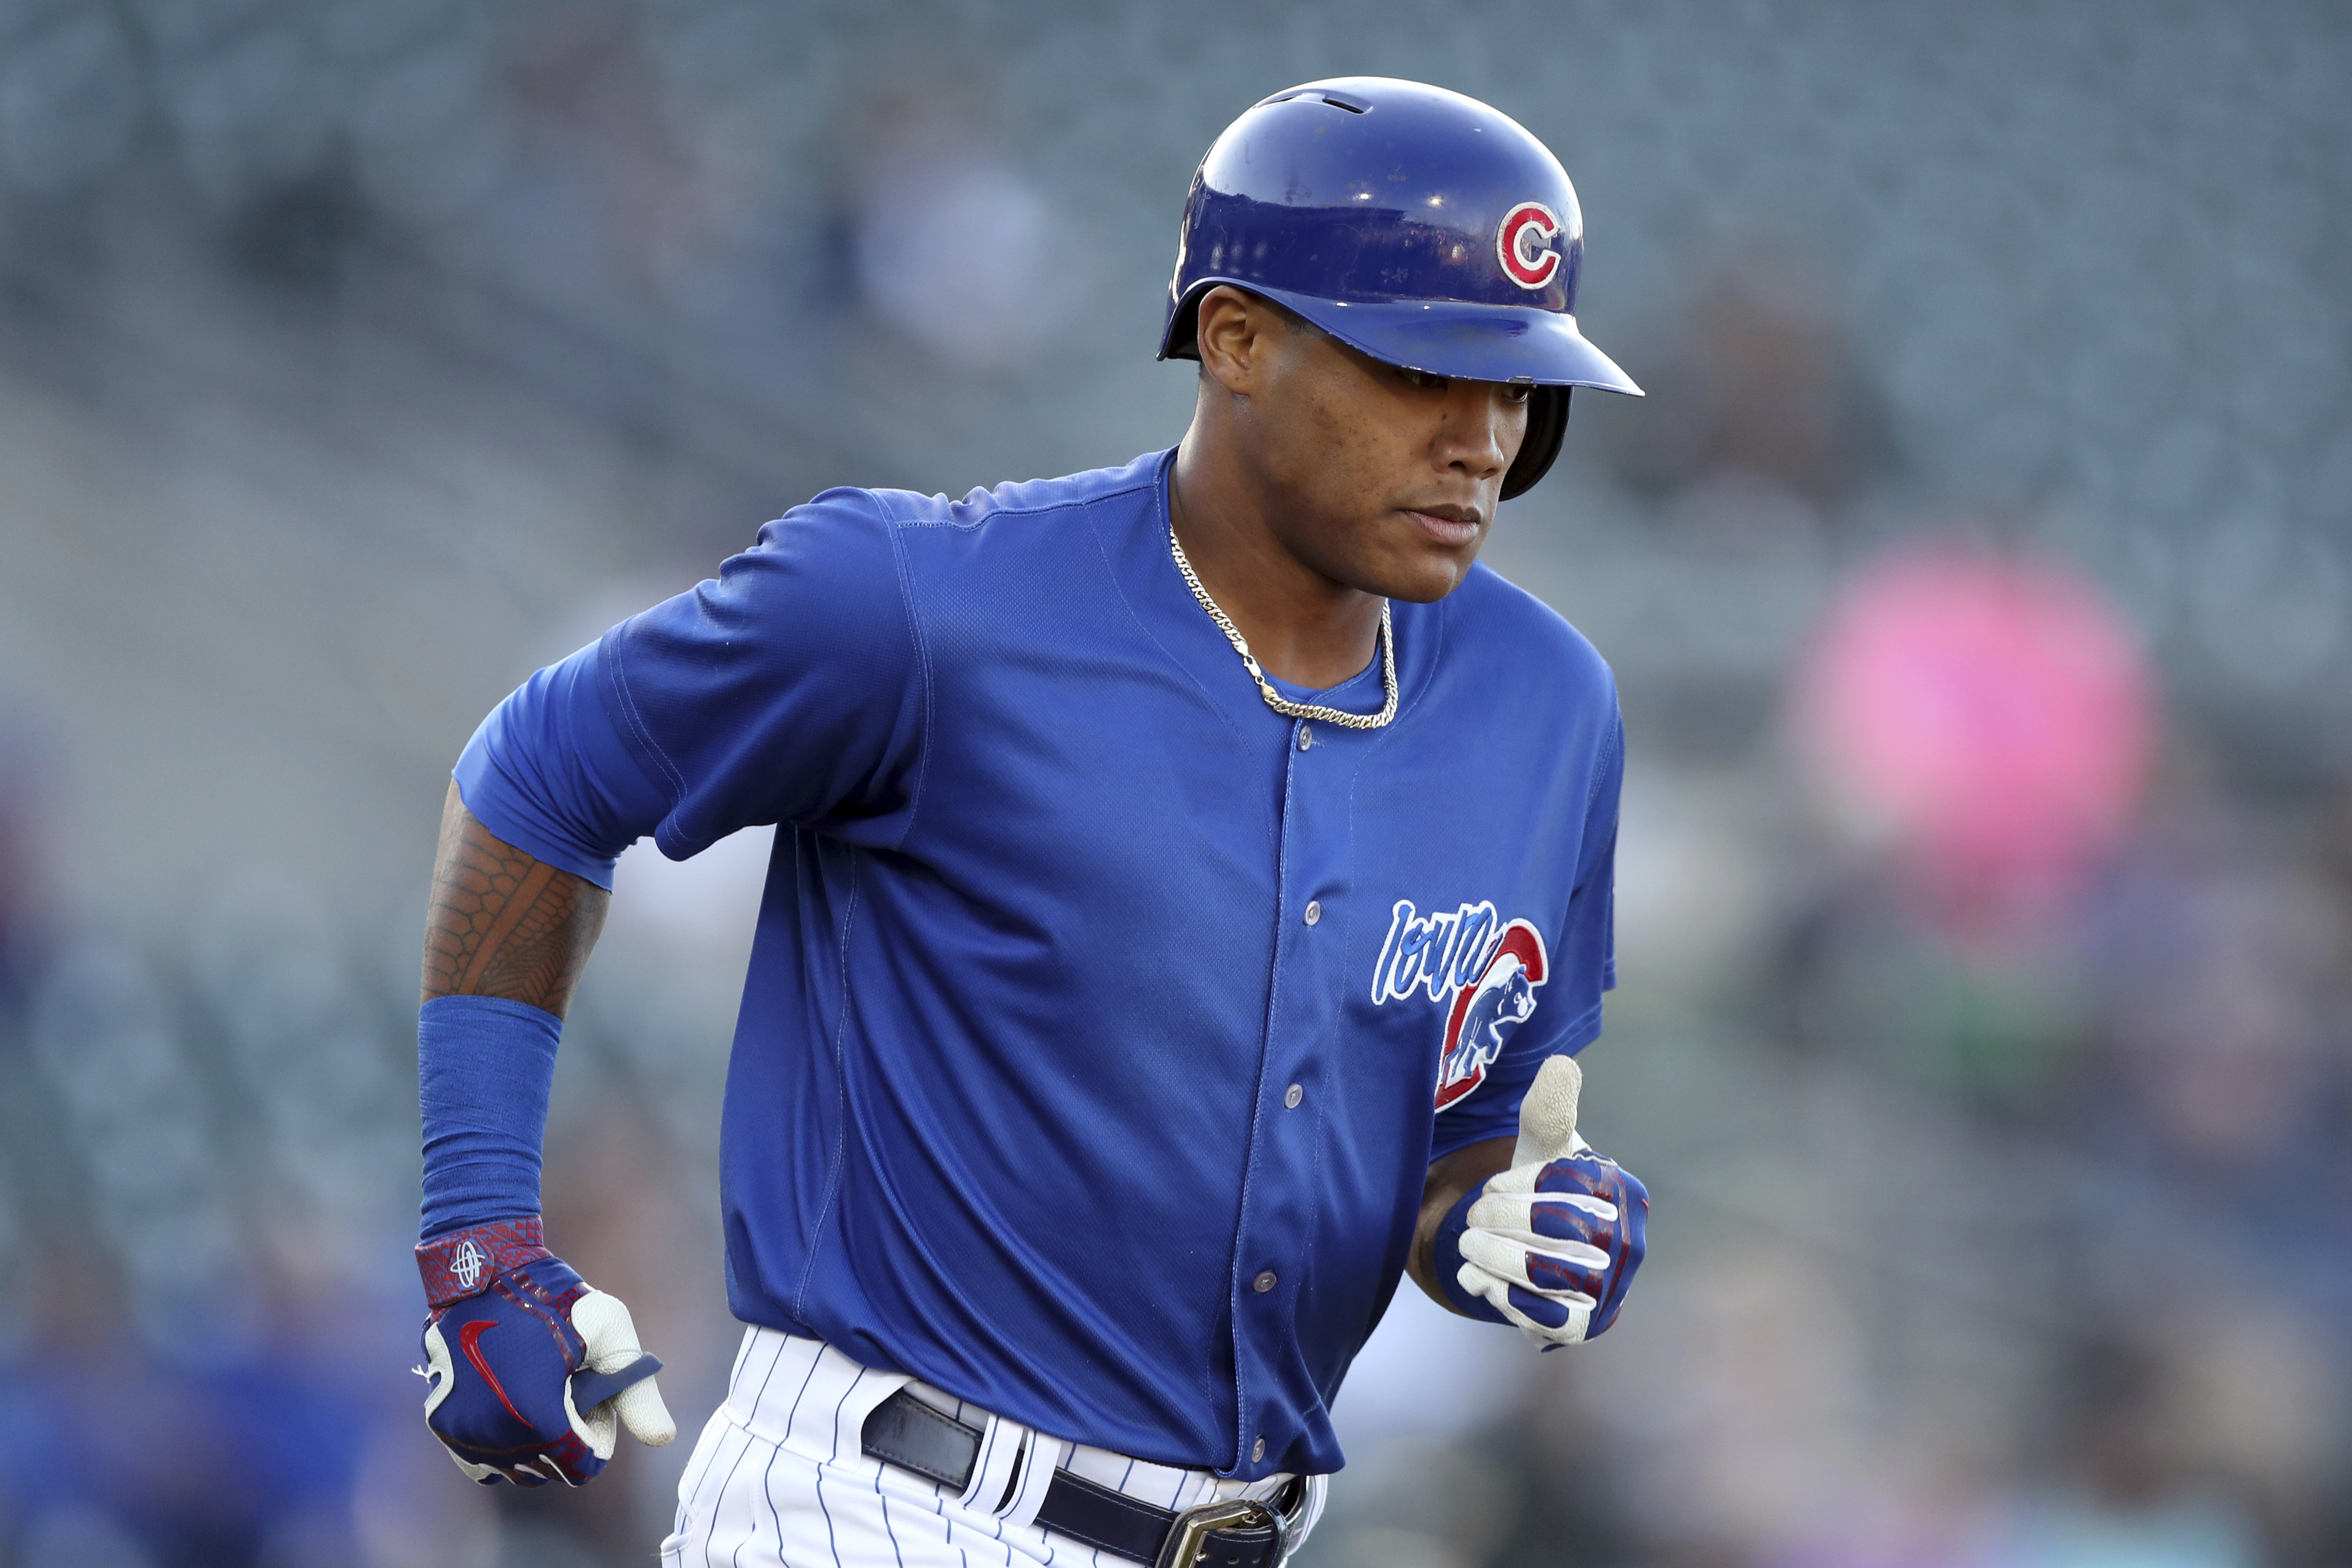 Cubs option Russell to Triple-A after completing suspension